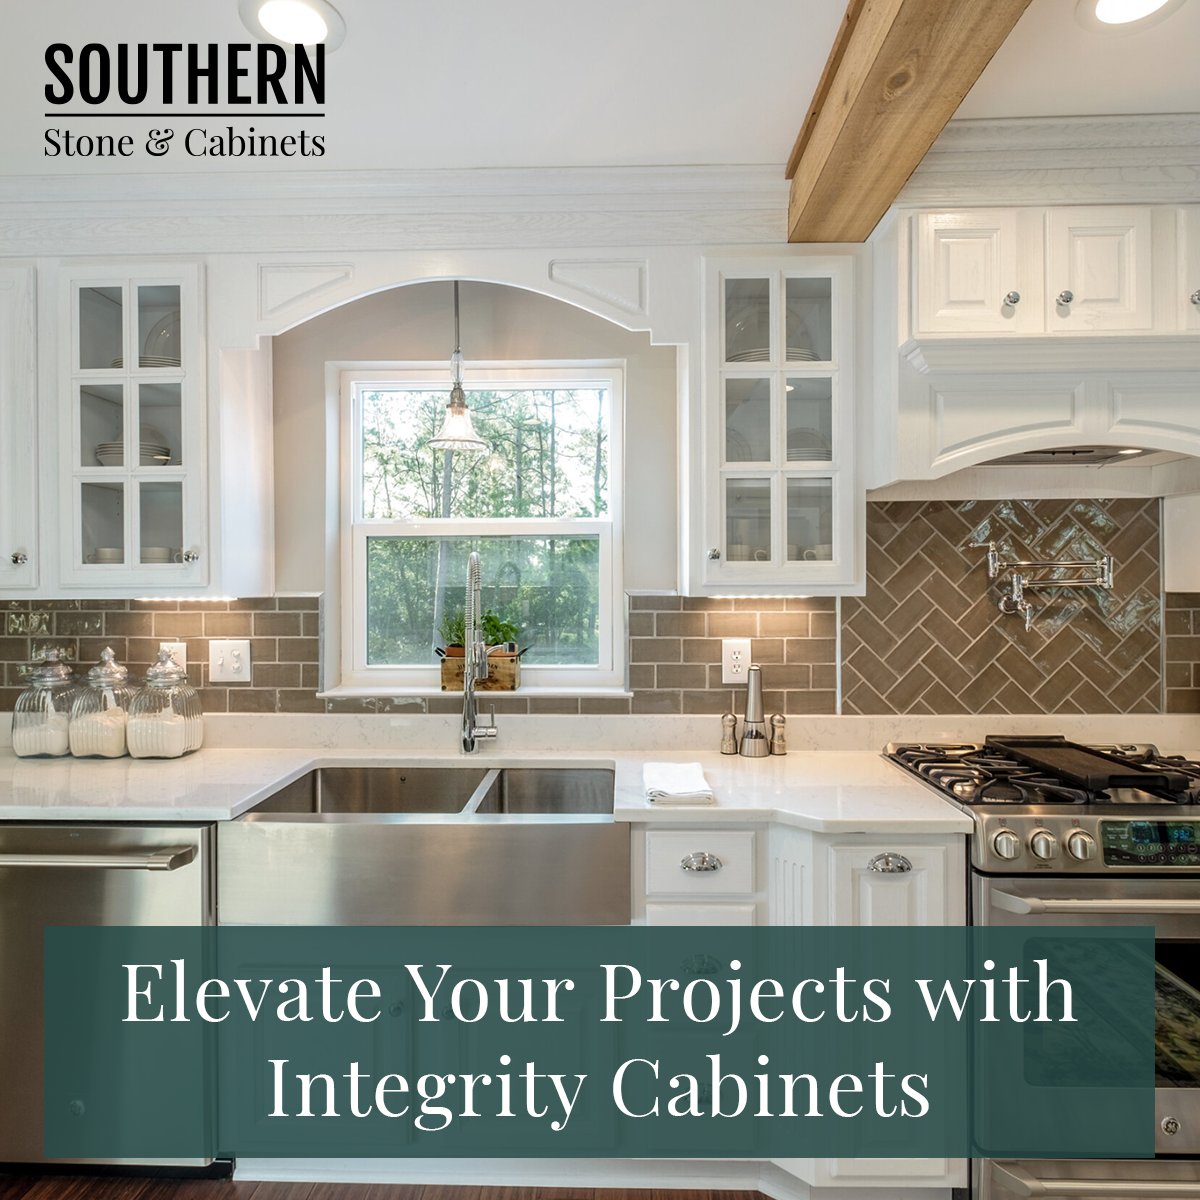 Functionality and practicality are paramount in every project.

Contact us today at 662-265-8132 to learn more.

vist.ly/x5e5

#southernstone #customcabinet #interiordesign #cabinets #customcabinetry